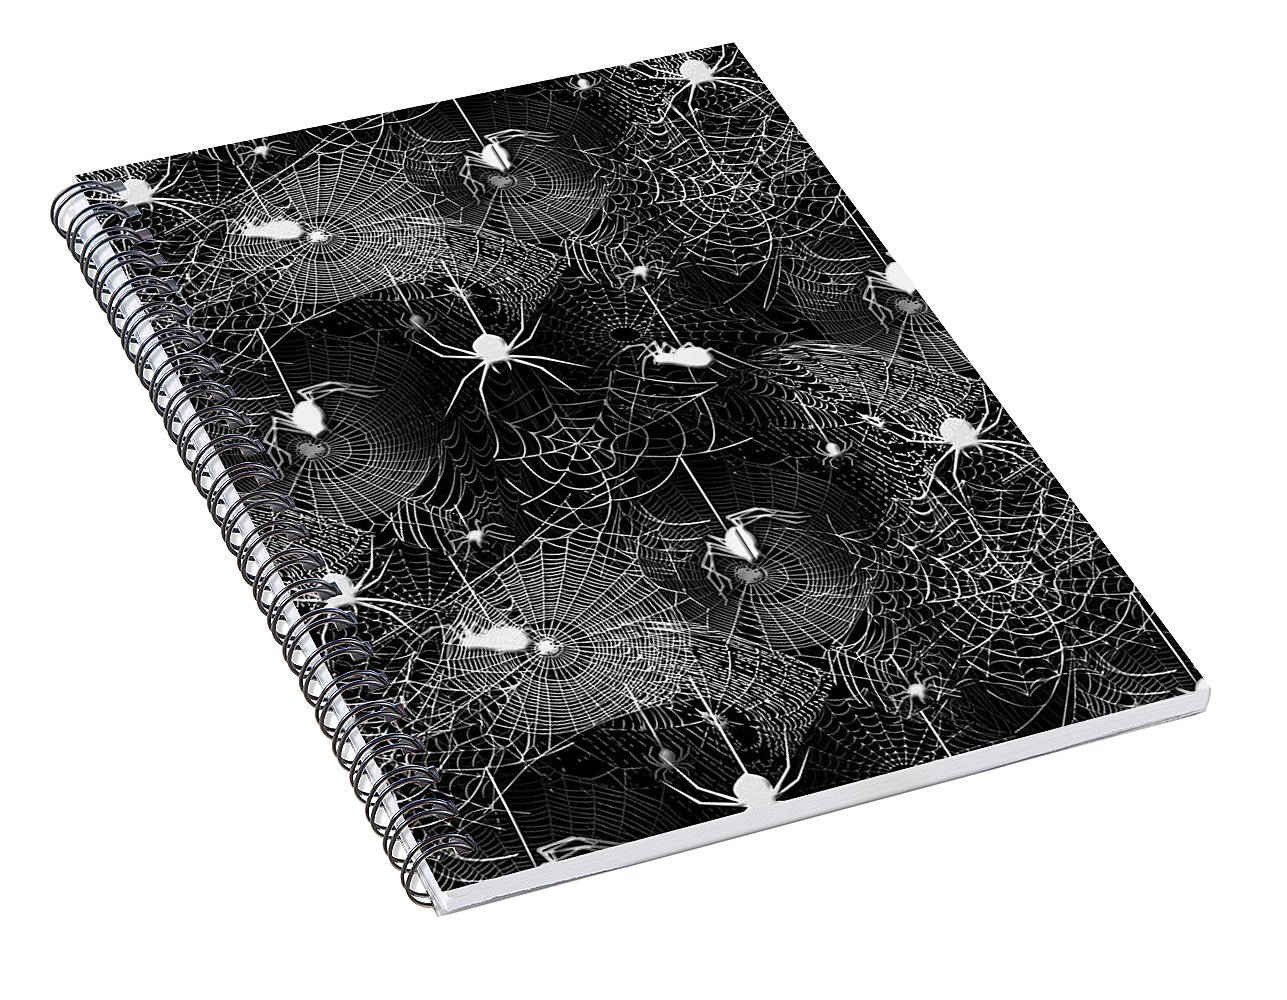 Black and White Spiders - Spiral Notebook